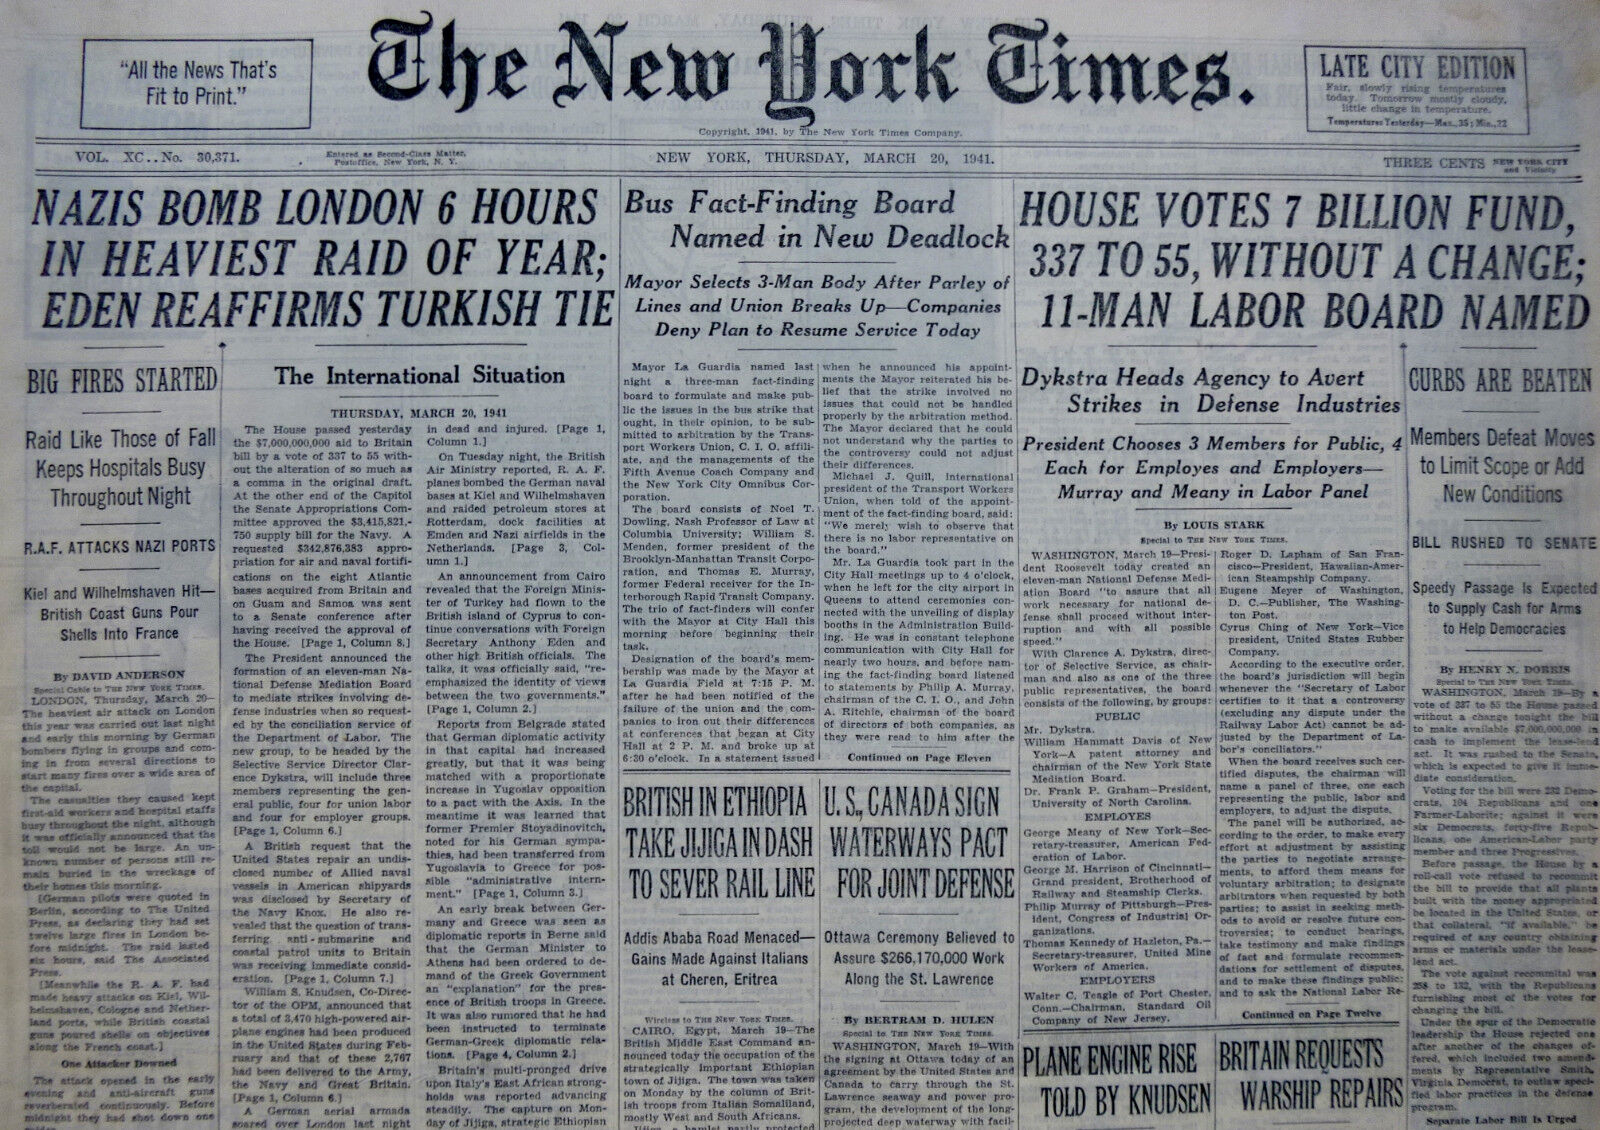 3-1941 WWII March 20 NAZIS BOMB LONDON 6 HOURS IN HEAVIEST RAID OF YEAR